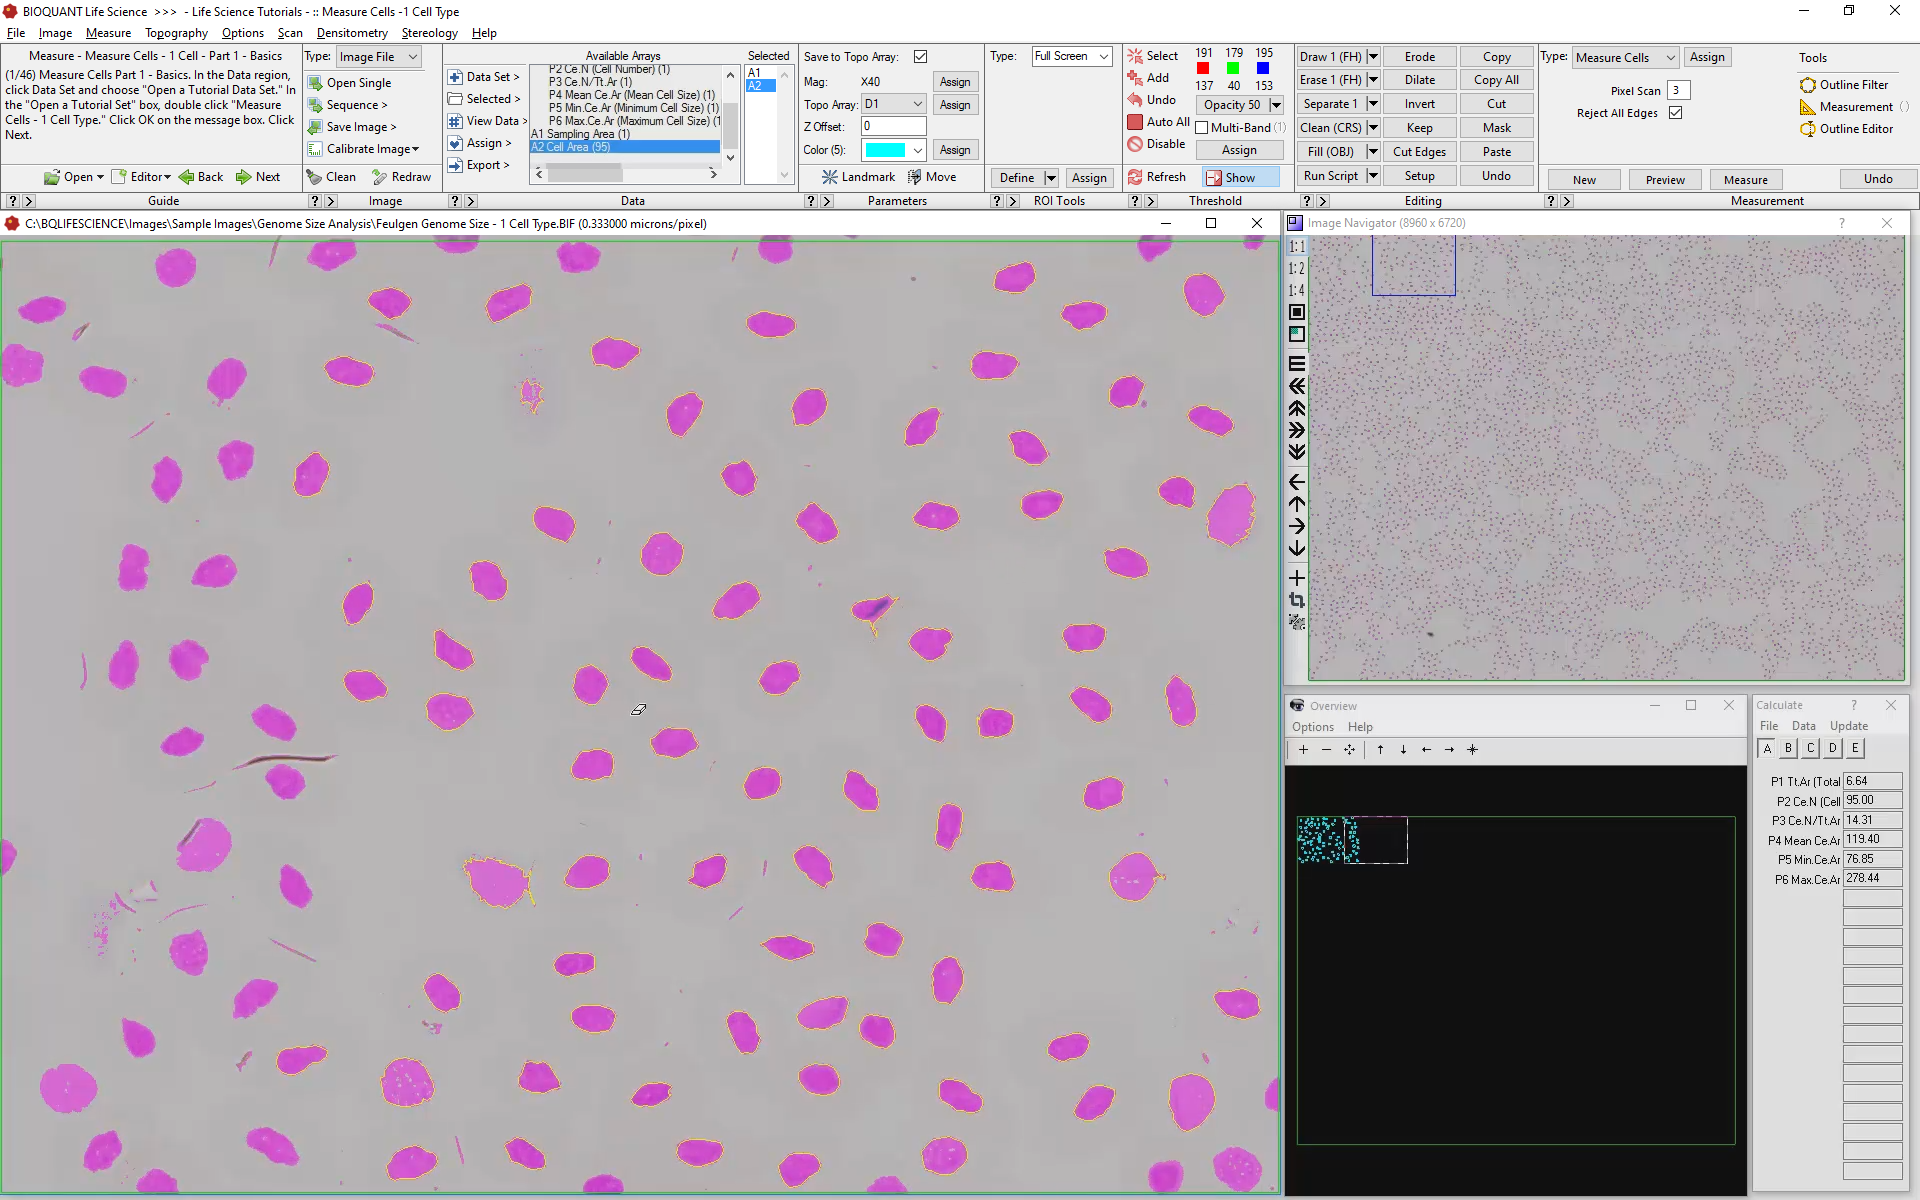 Cell_Counting-2nd-Field-Previewed.png